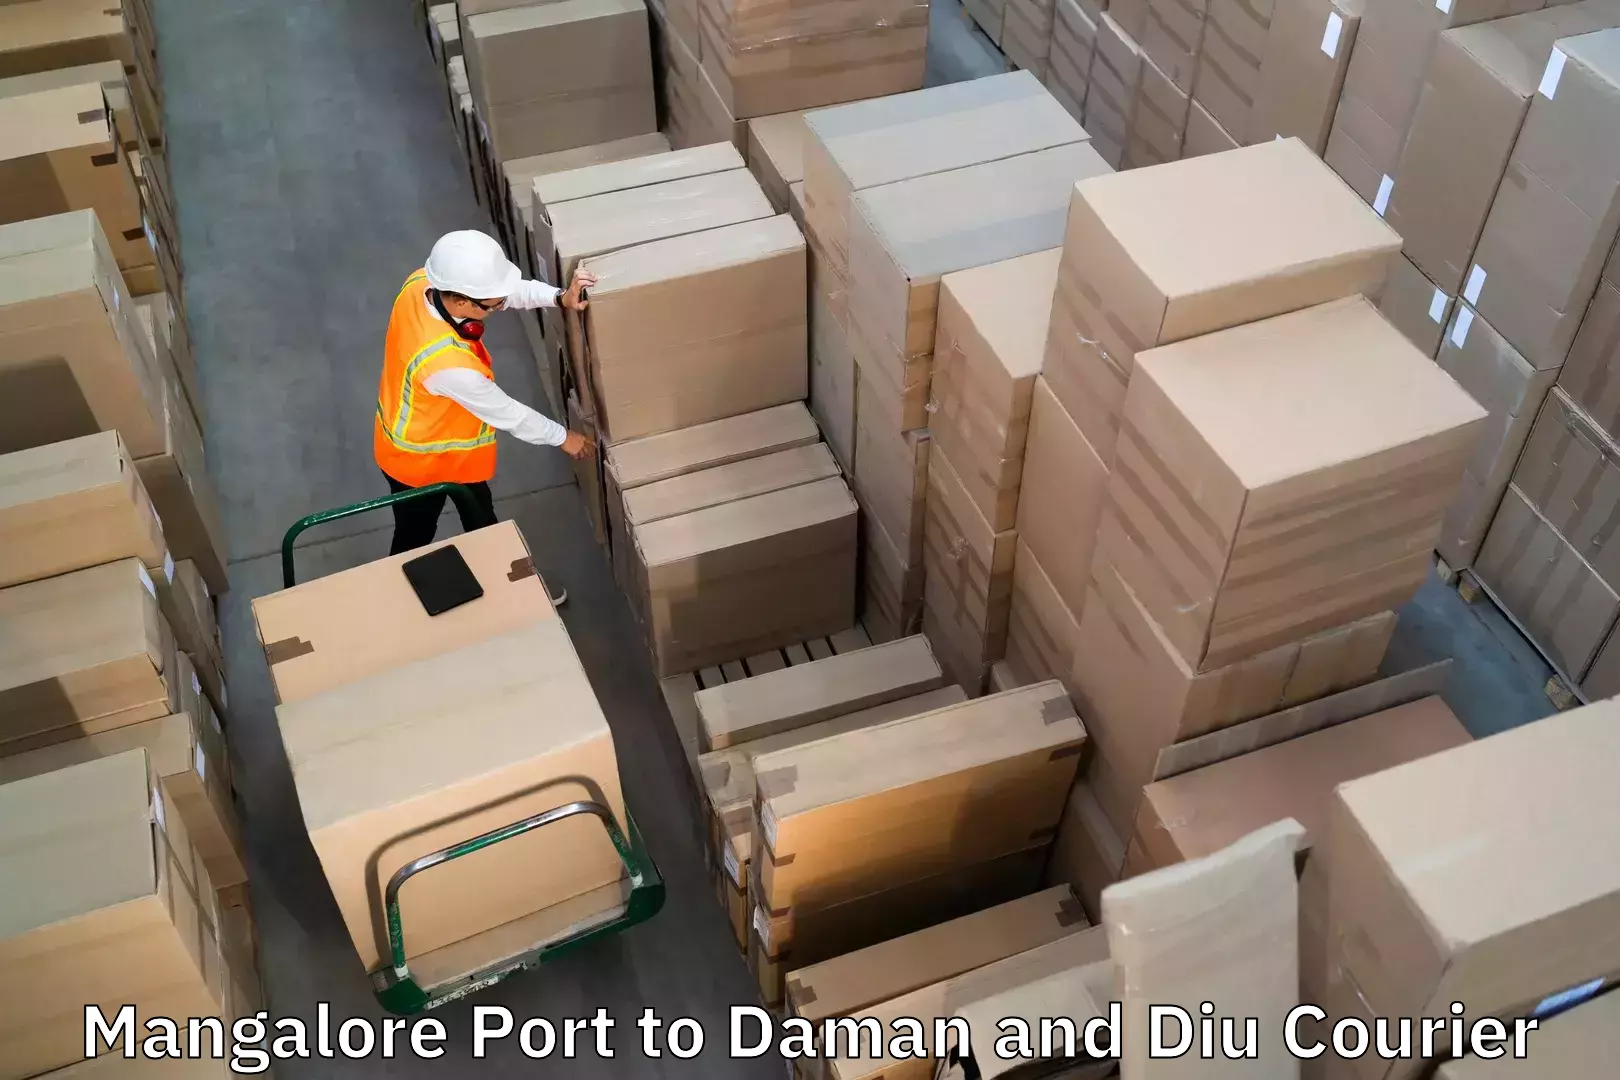 Baggage relocation service Mangalore Port to Diu